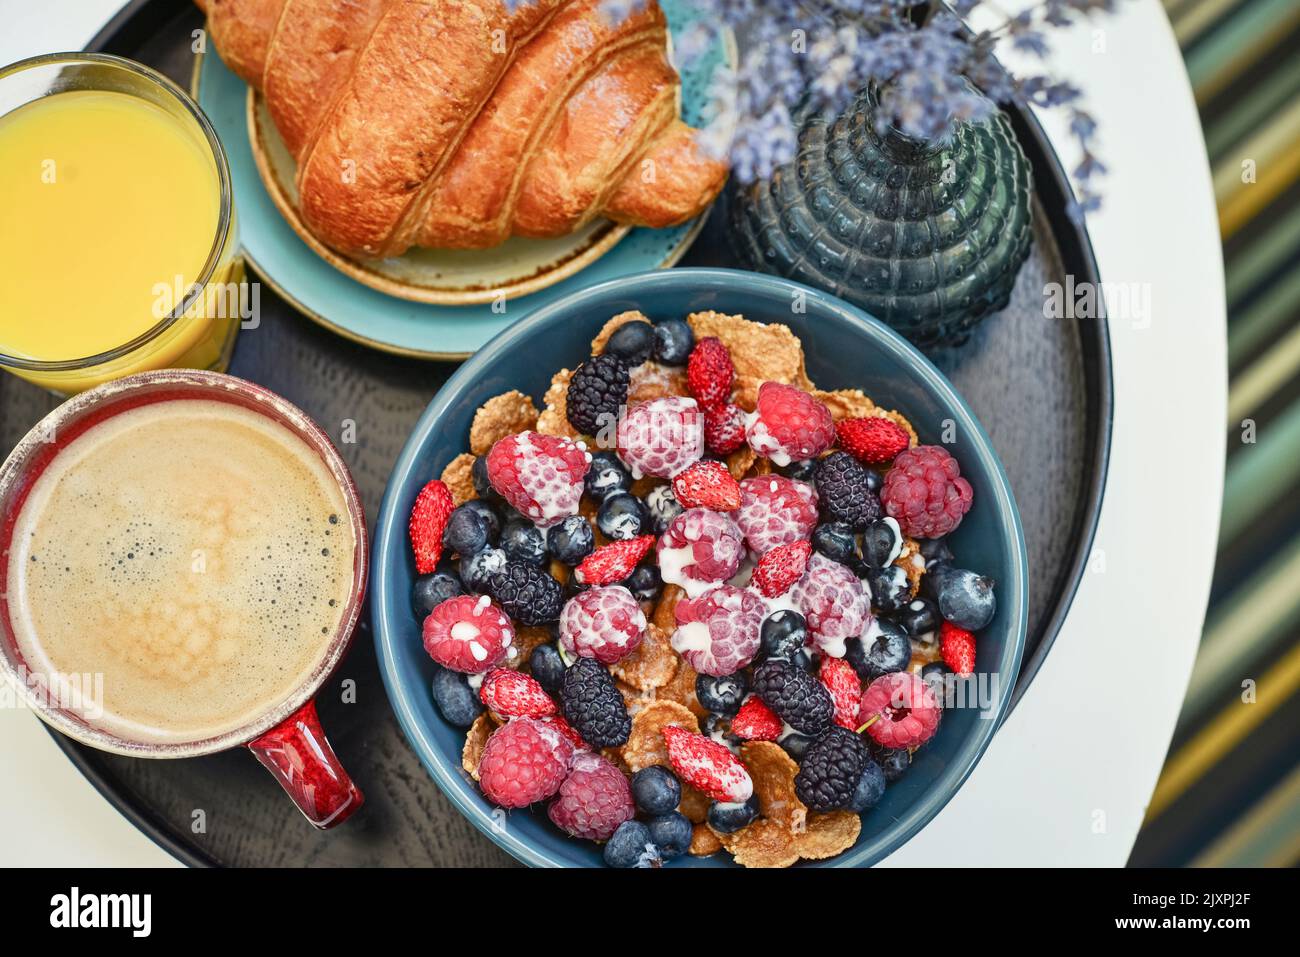 Healthy breakfast with berries, cereals and natural yogurt, coffee, orange juice, croissant on black round tray Stock Photo